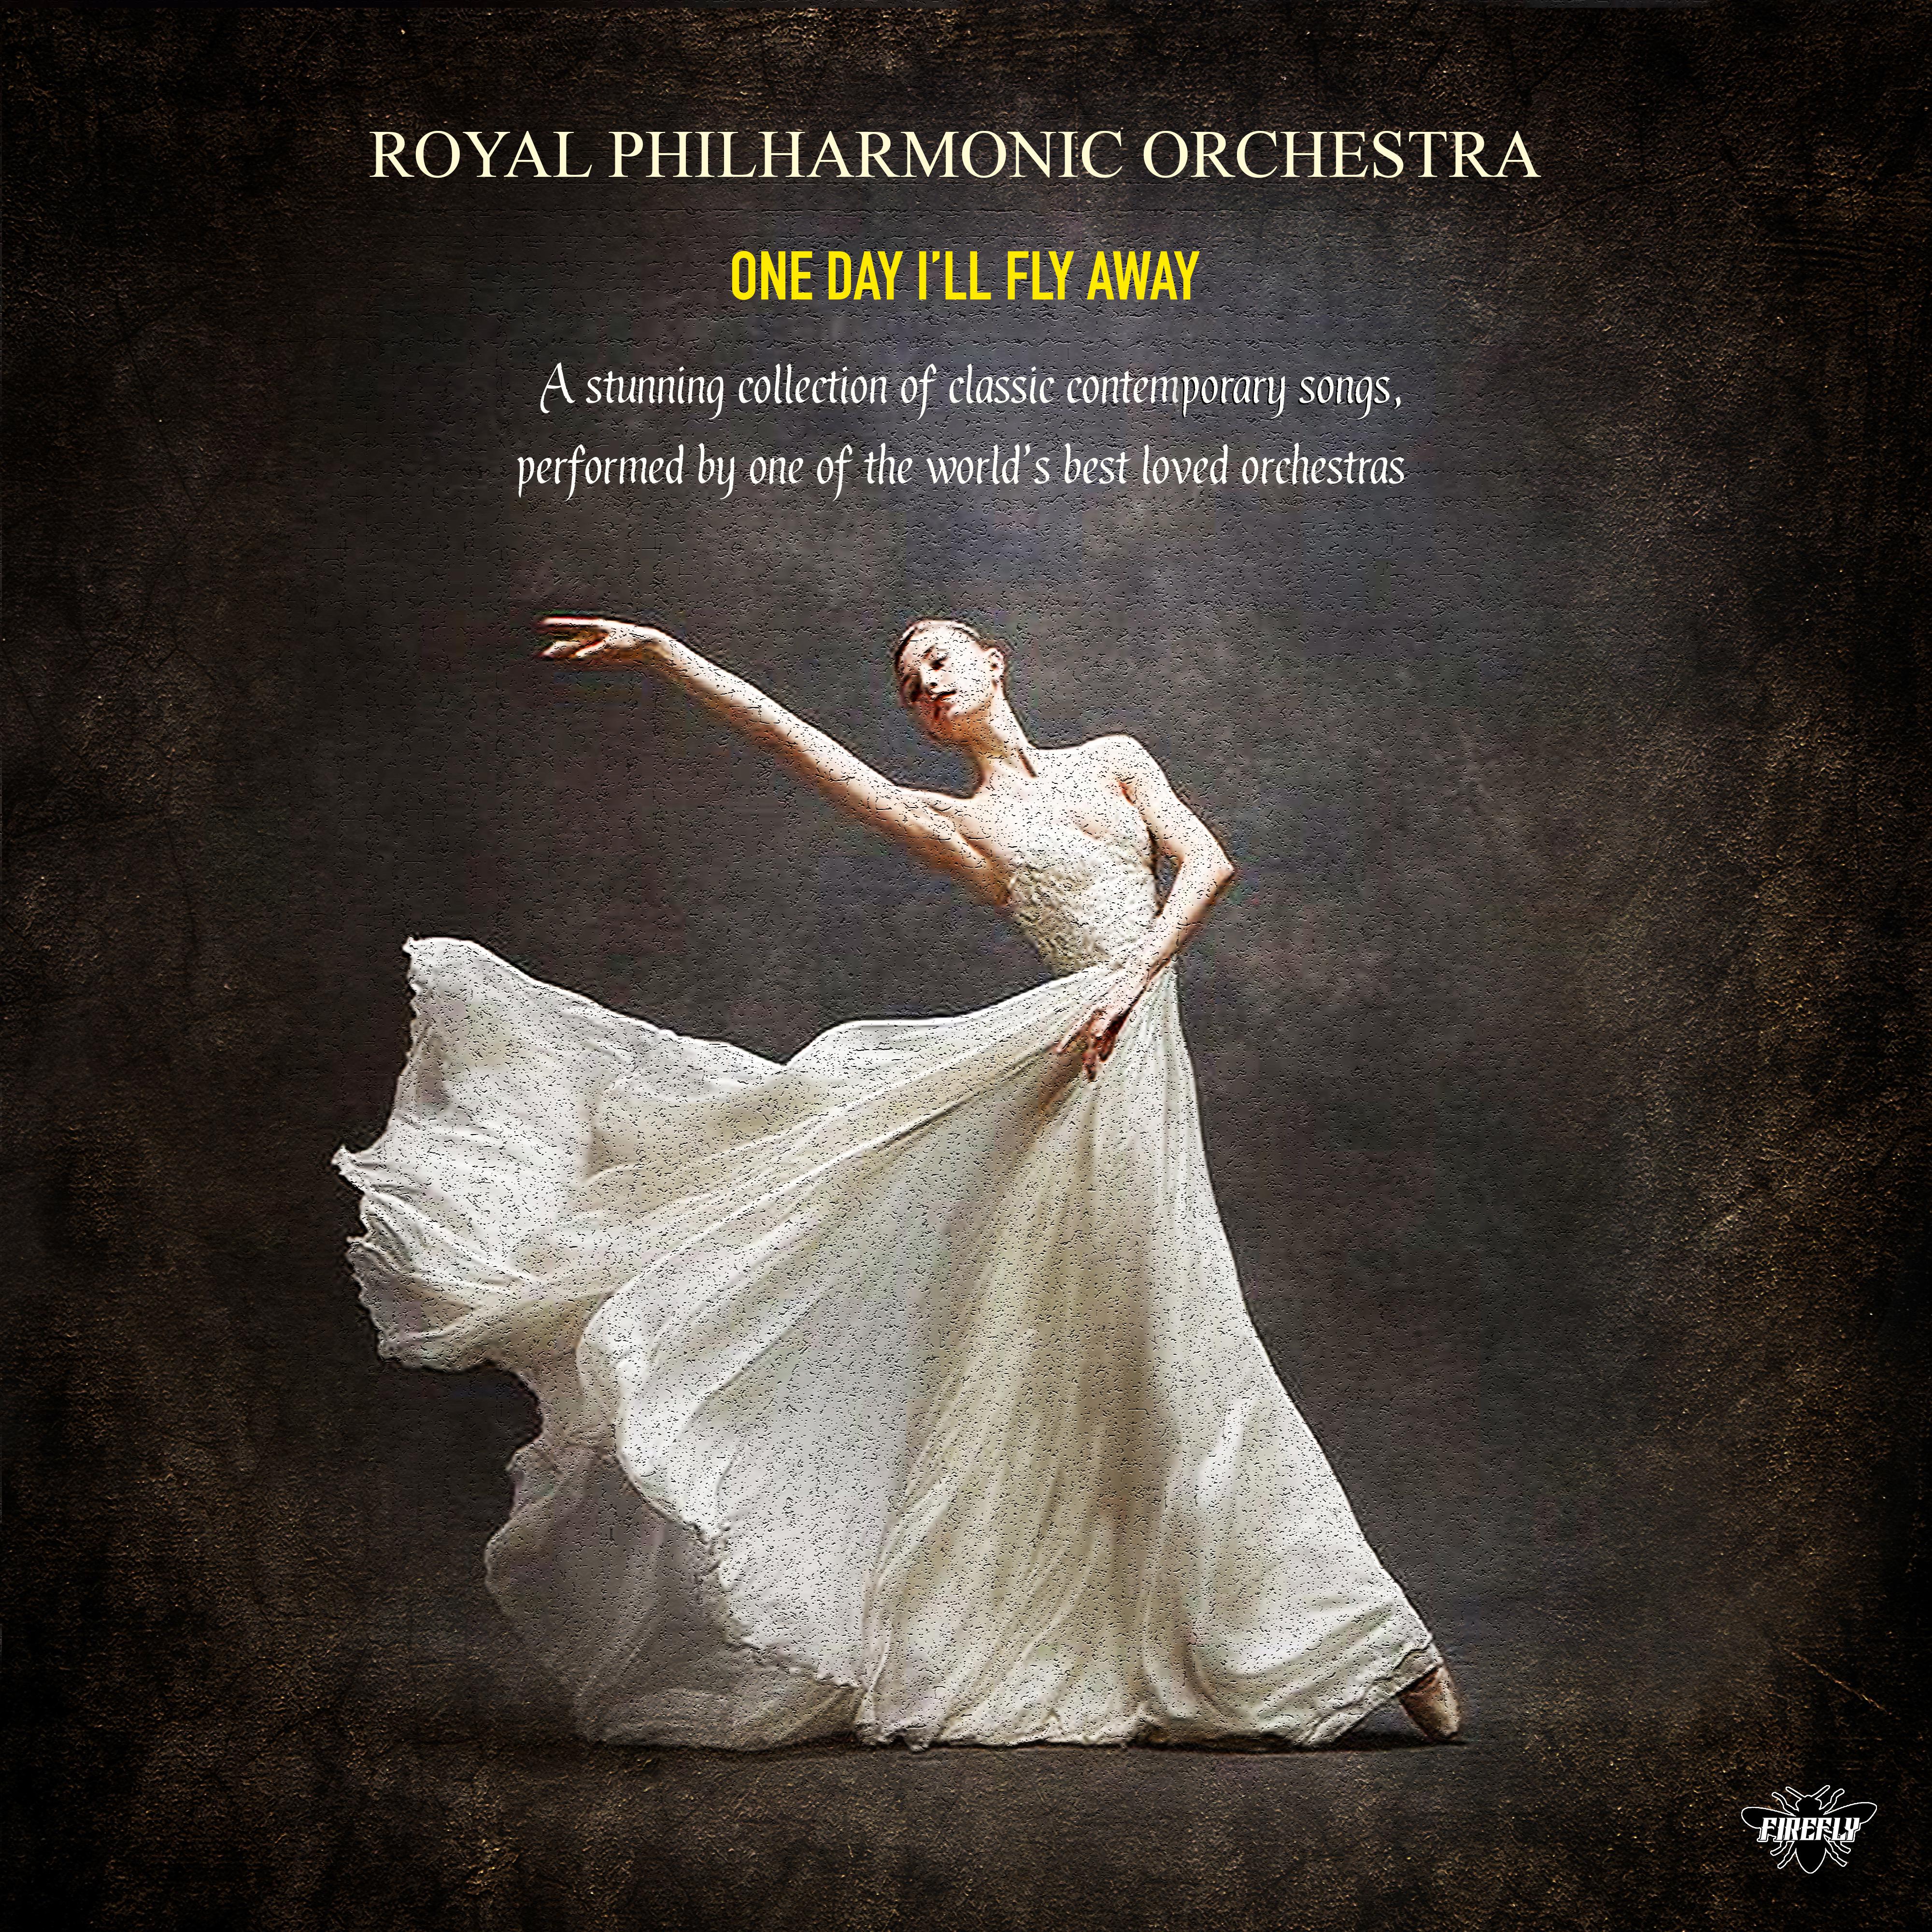 Royal Philharmonic Orchestra - One Day I'll Fly Away